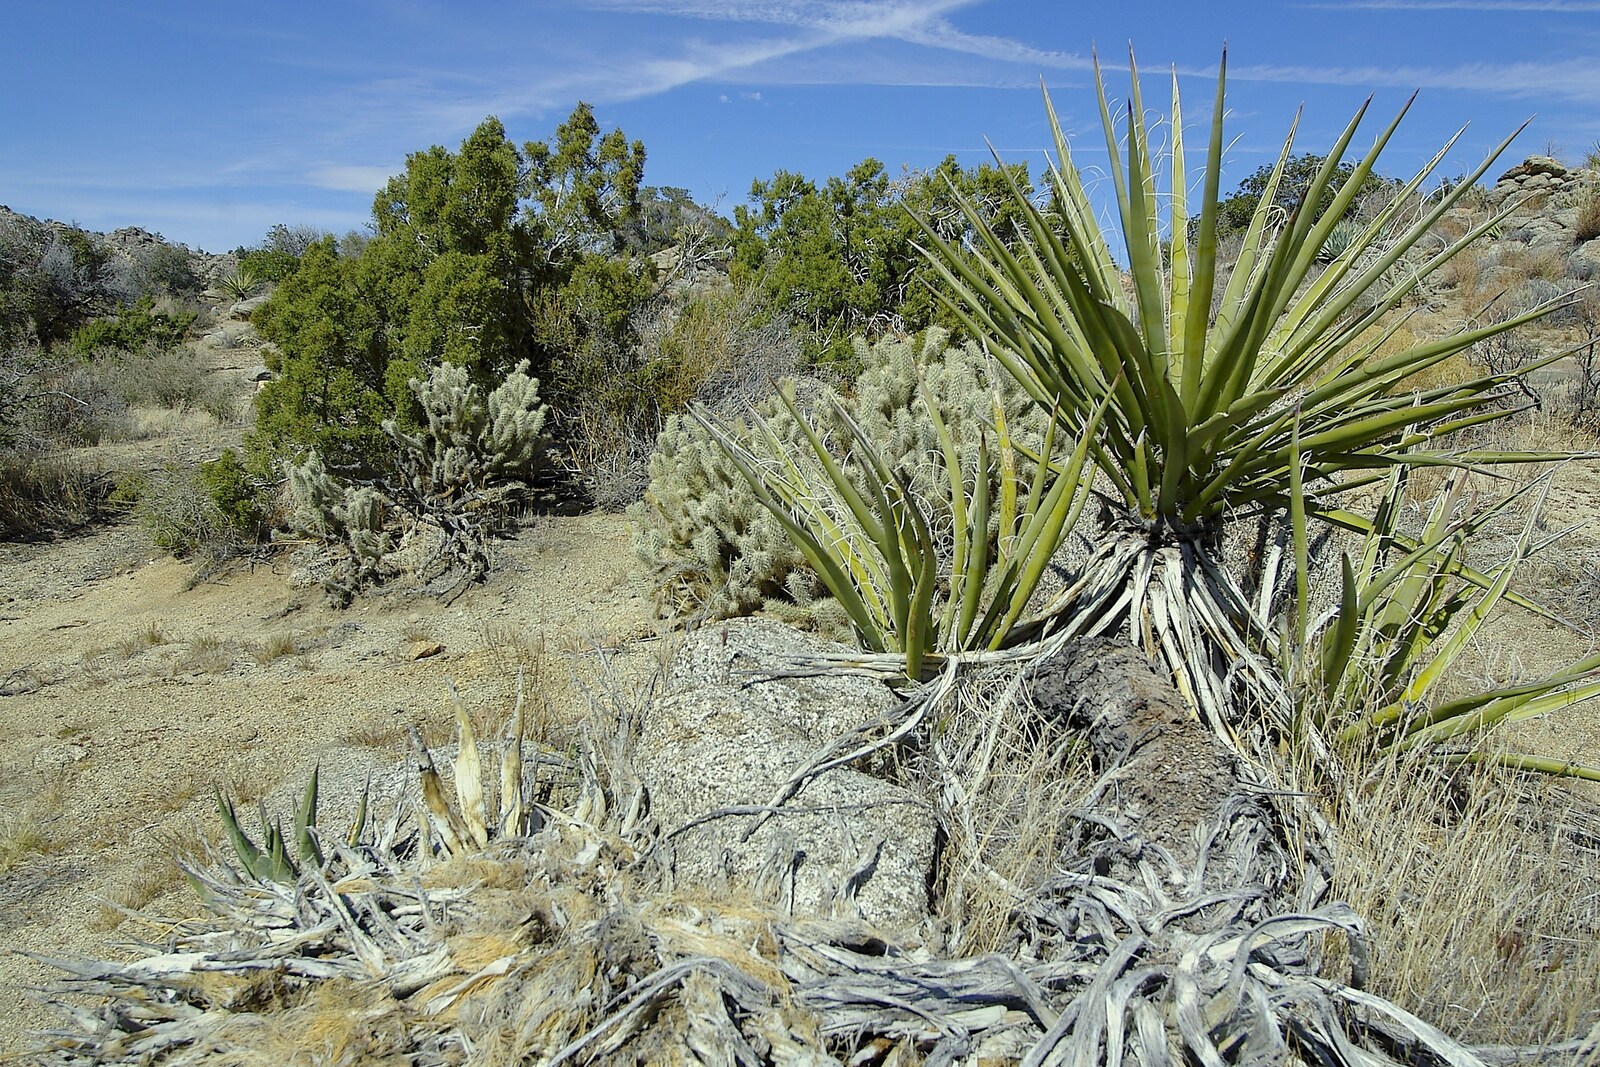 An assortment of desert plants from Mojave Desert: San Diego to Joshua Tree and Twentynine Palms, California, US - 5th March 2006